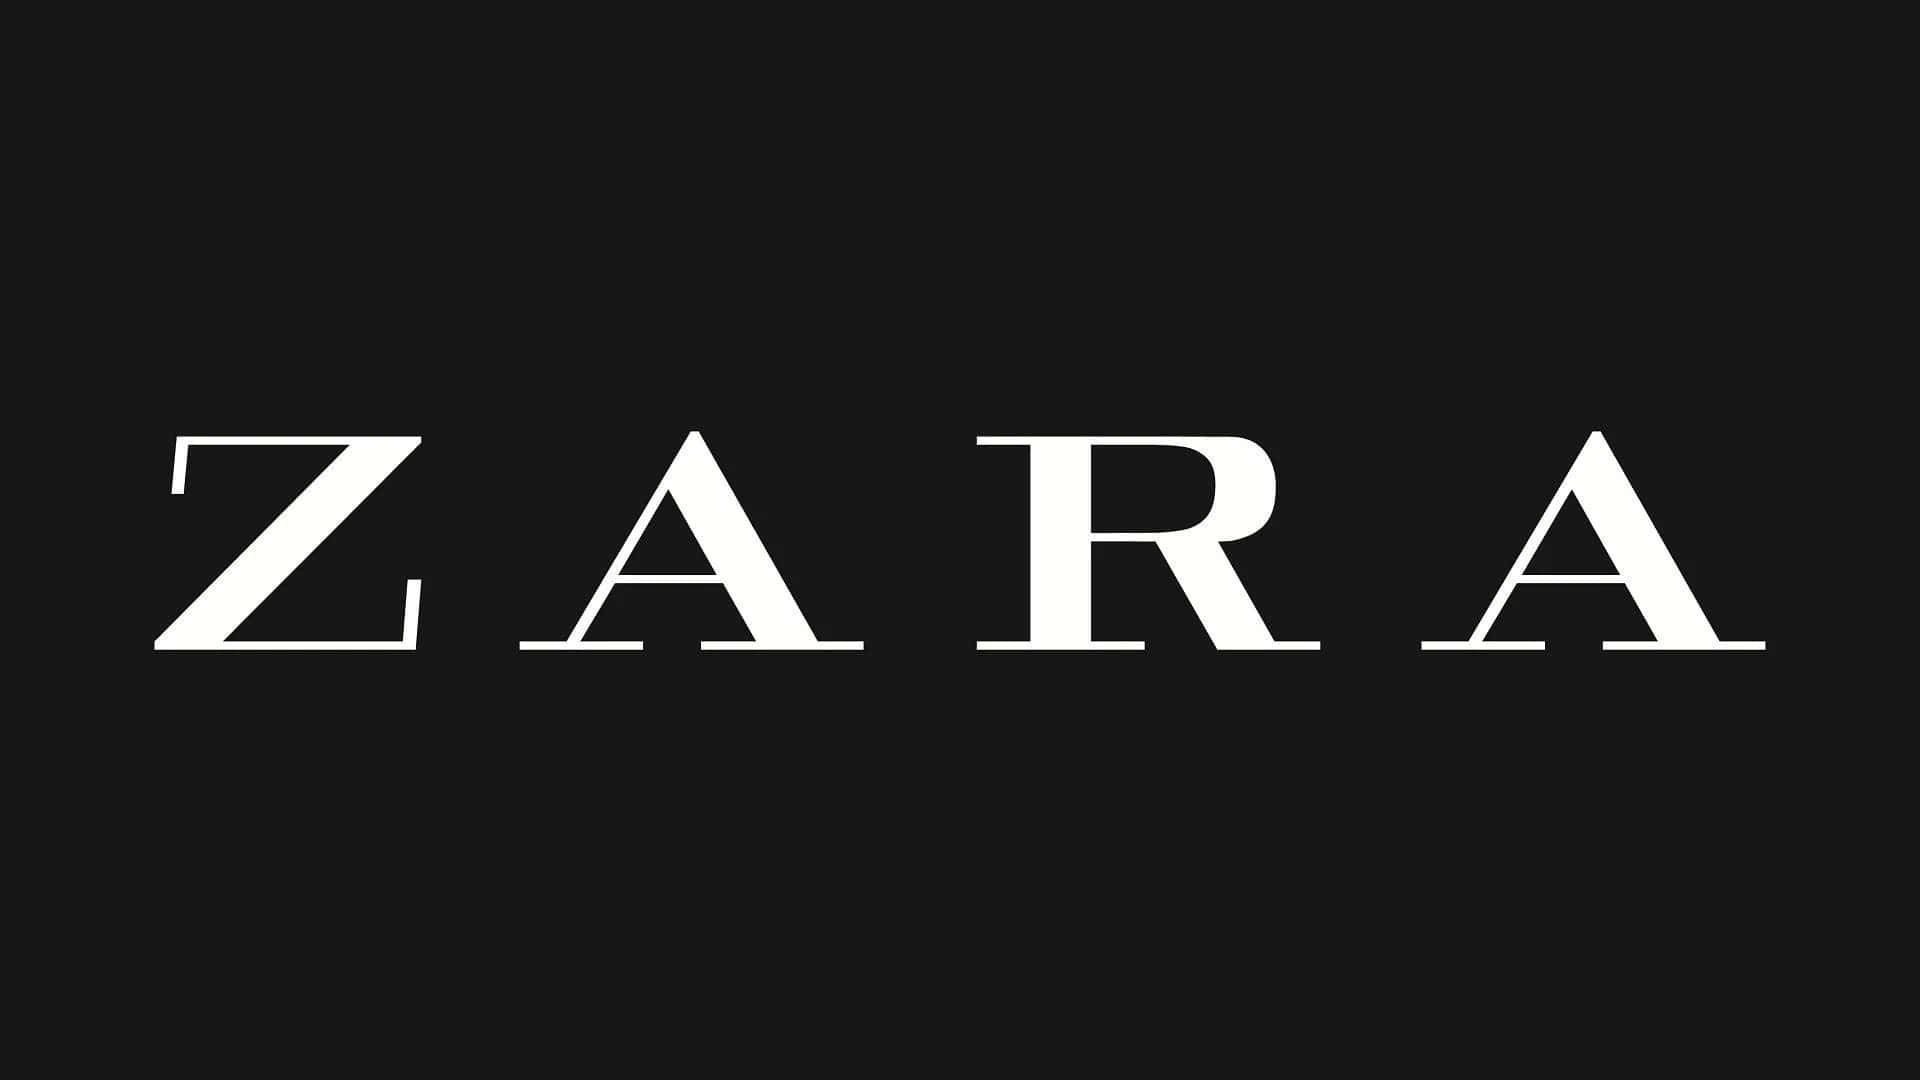 Zara - On-Trend Fashion from the World's Most Popular Clothing Store